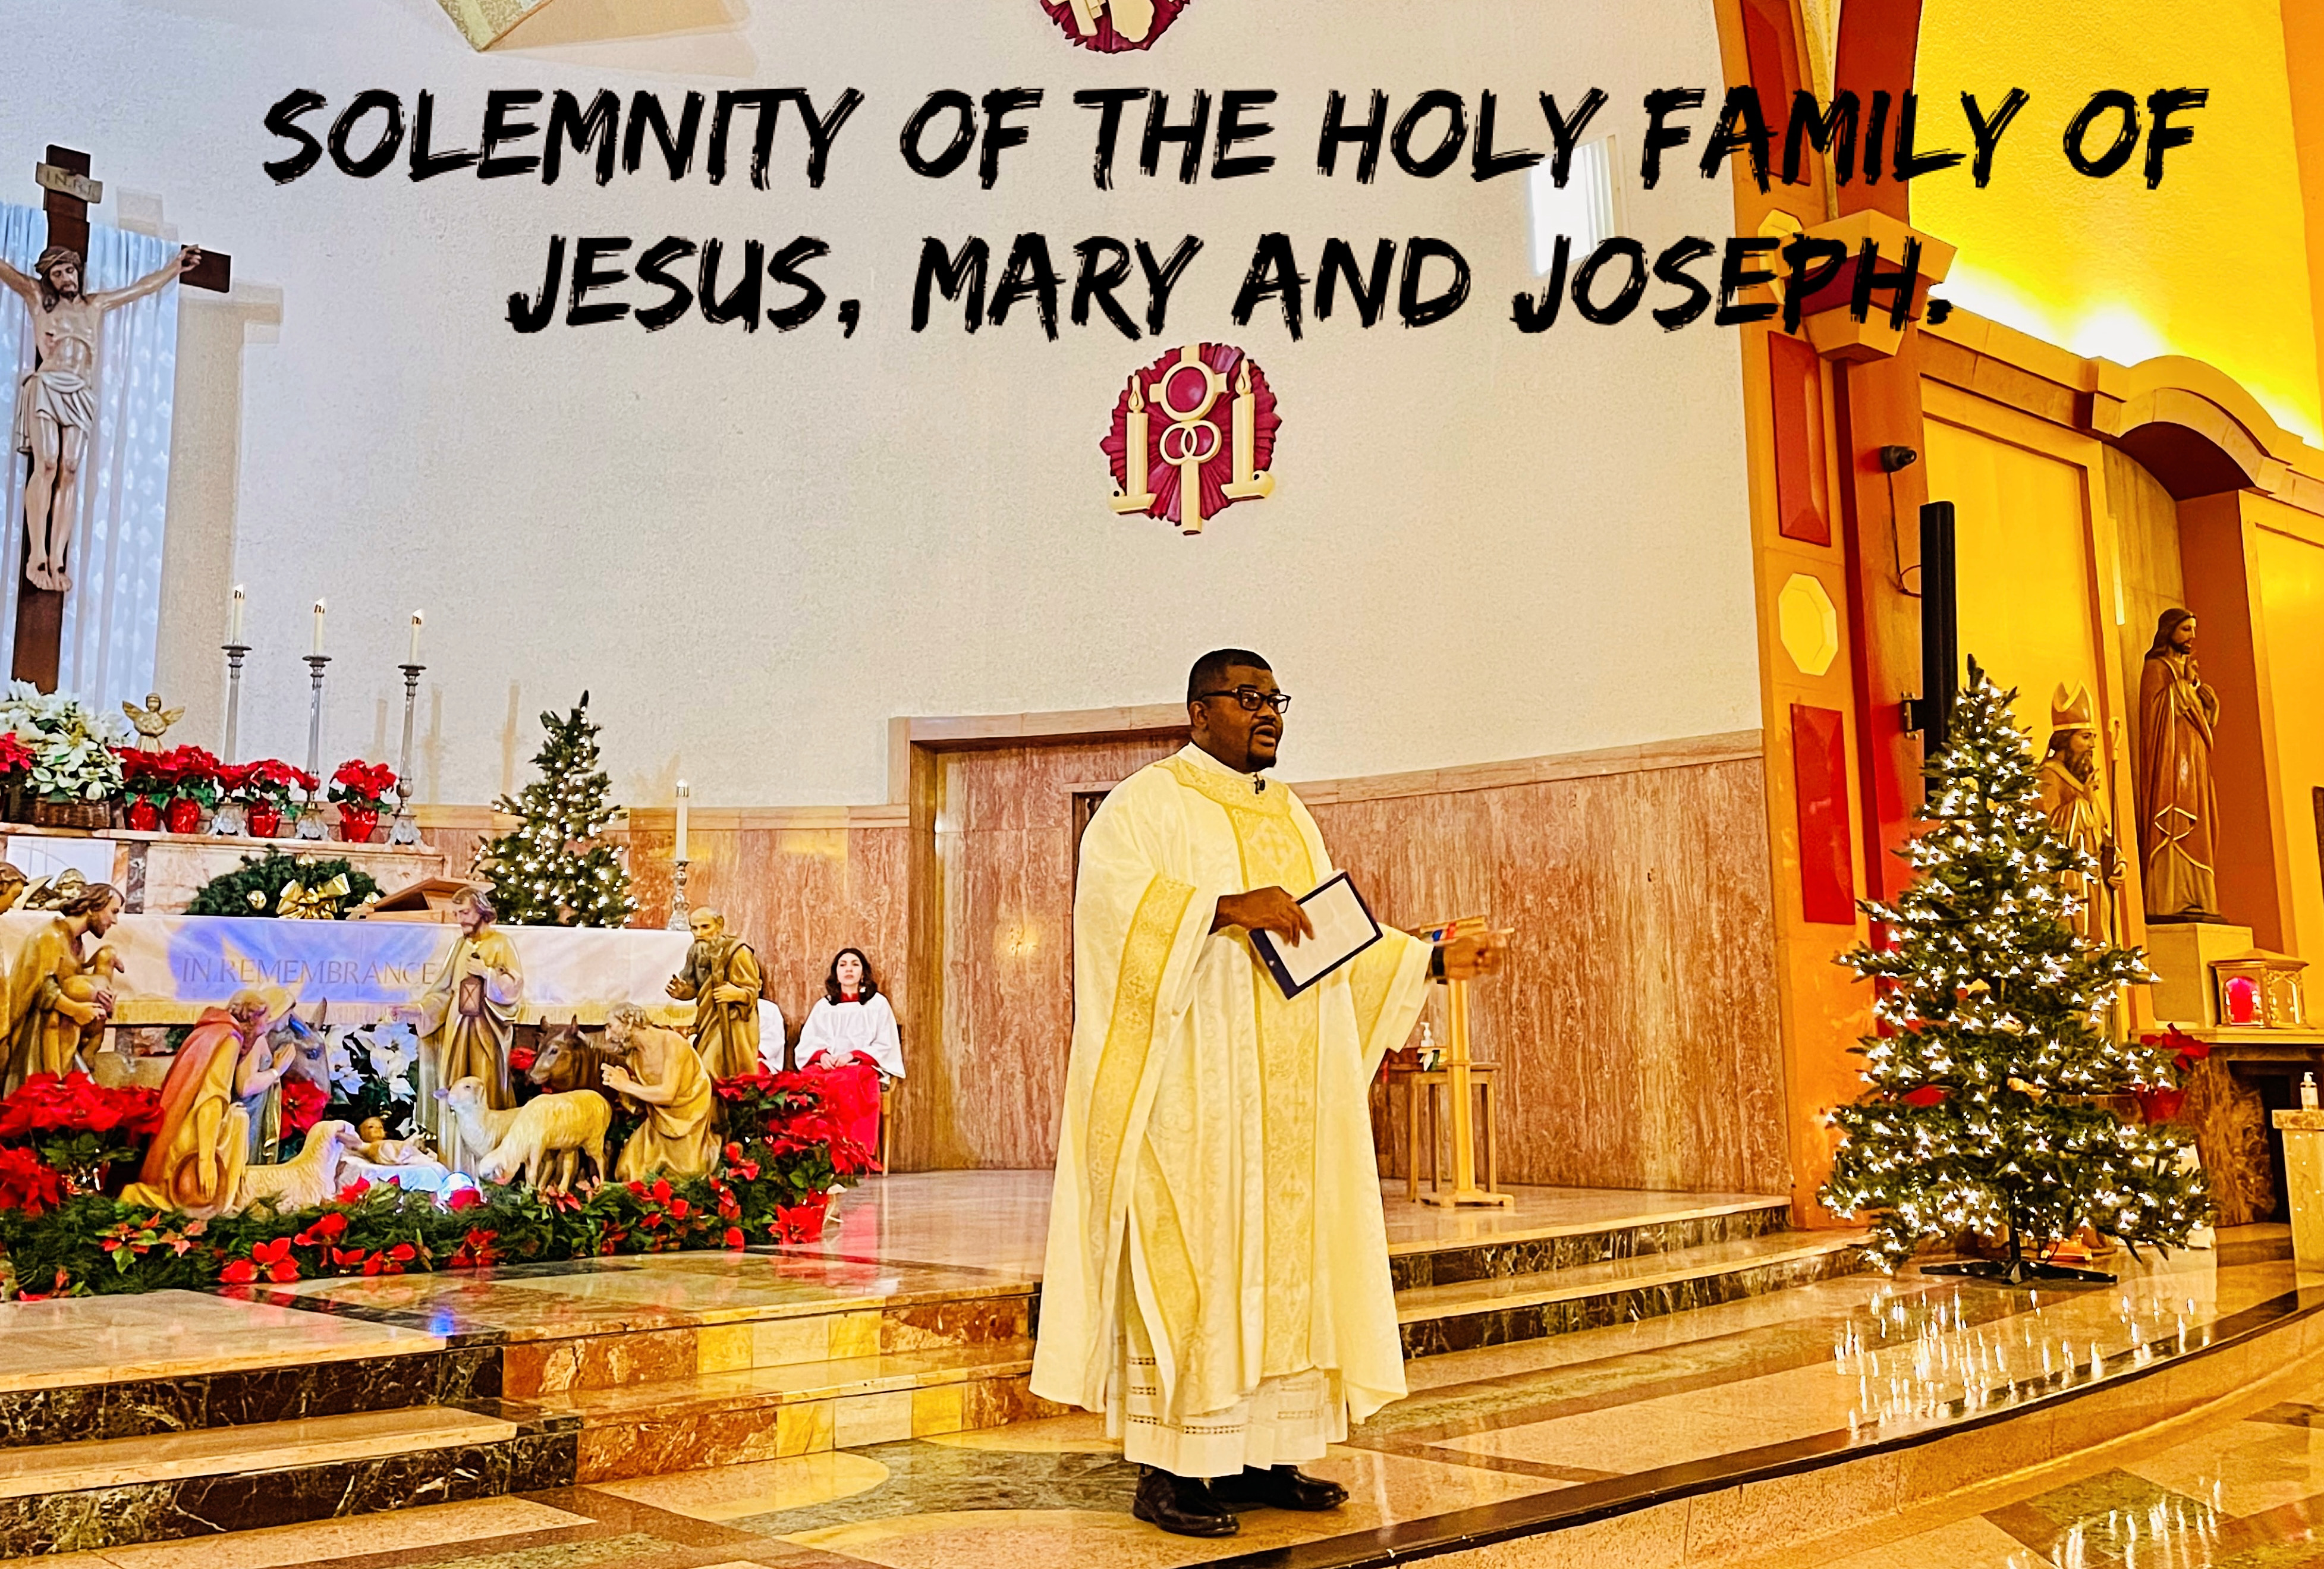 Solemnity of the Holy Family of Jesus, Mary and Joseph.